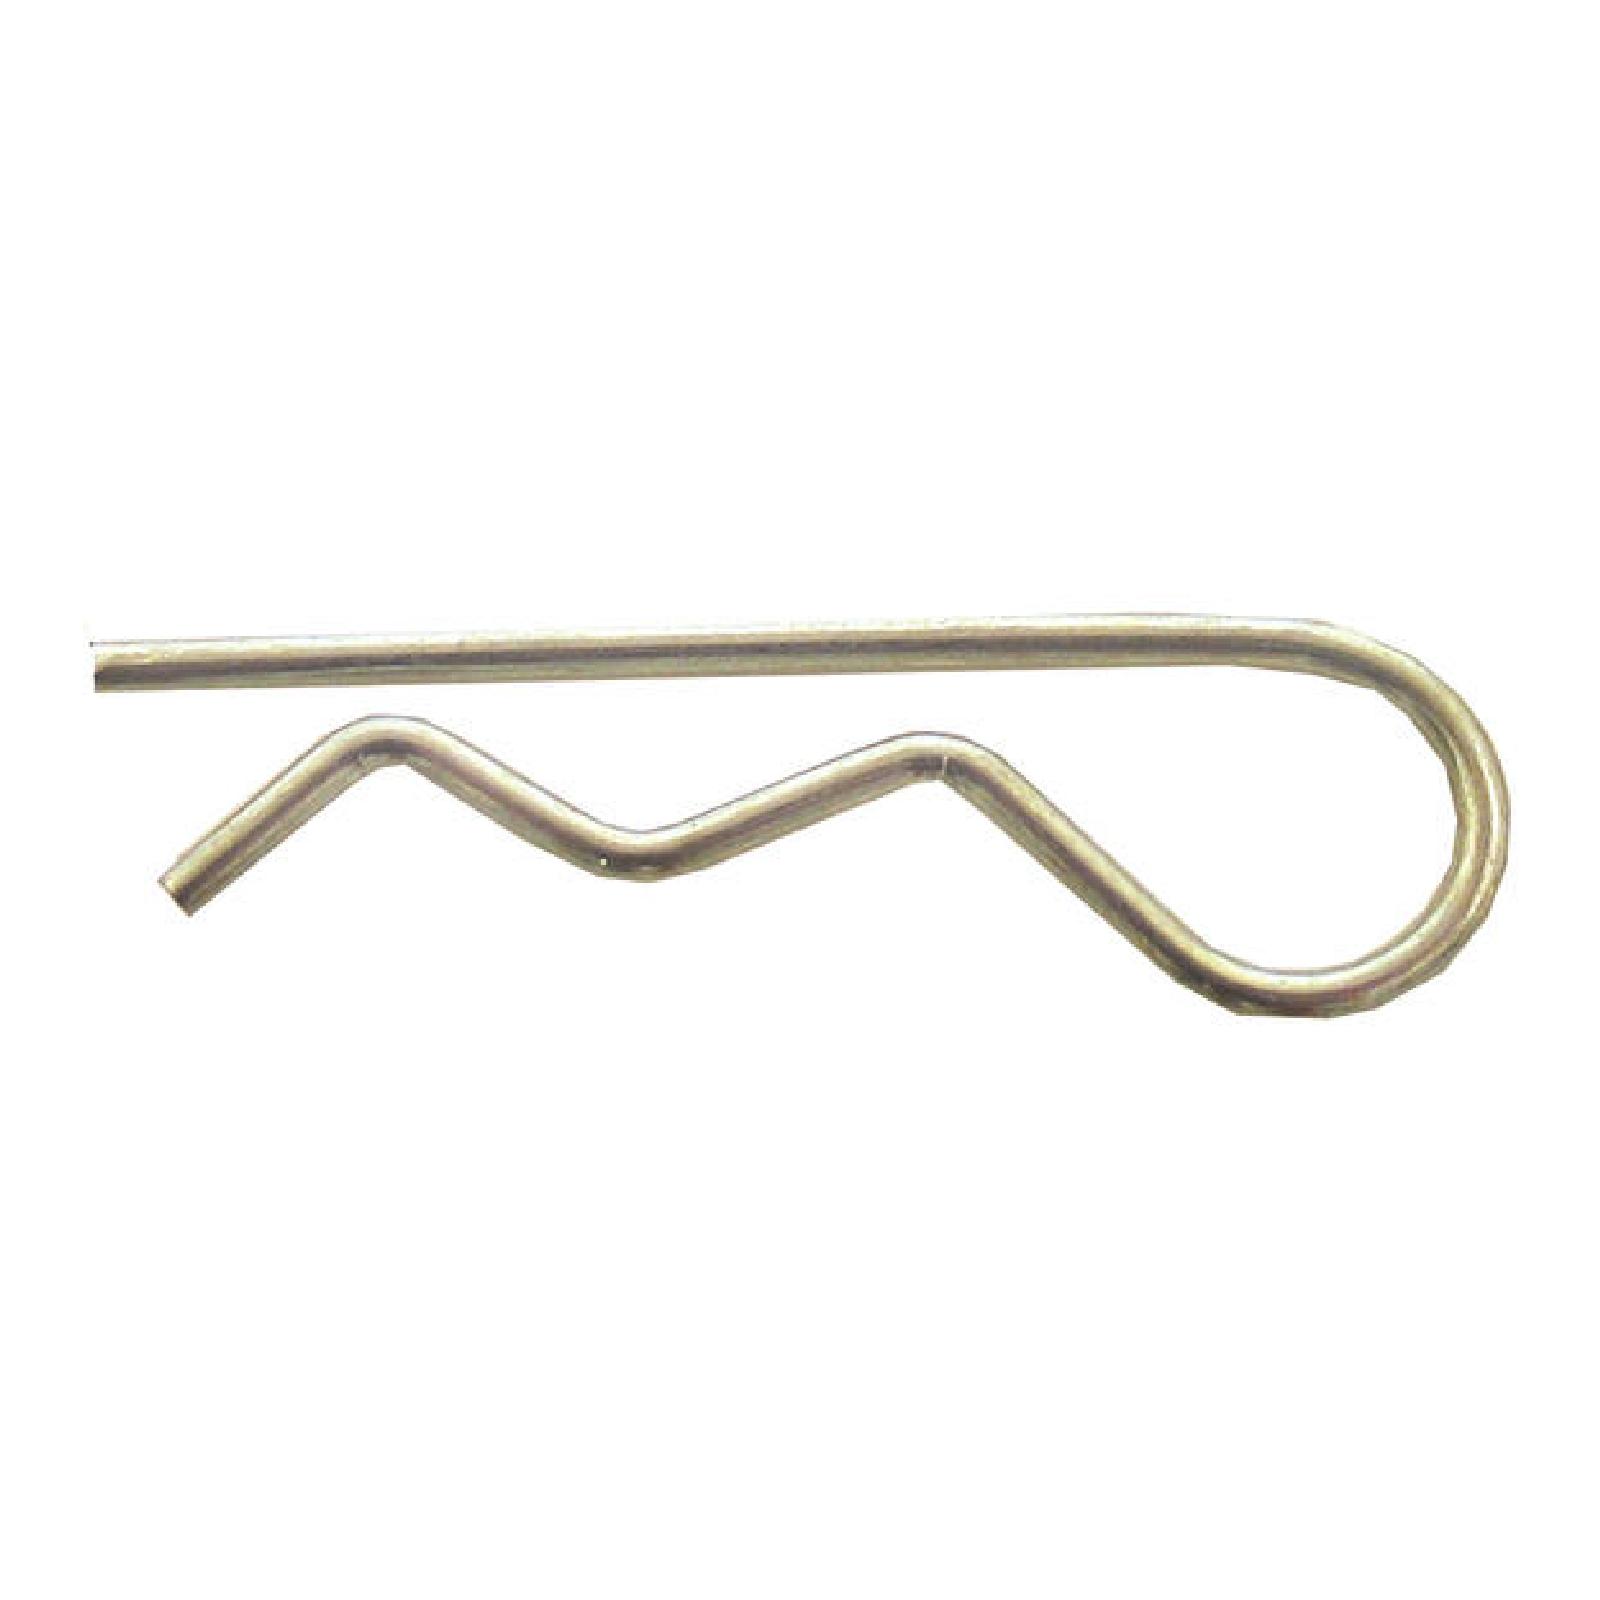 HAIR PIN CLIP .125 X 1 3/ part# 02-417 by Oregon - Click Image to Close